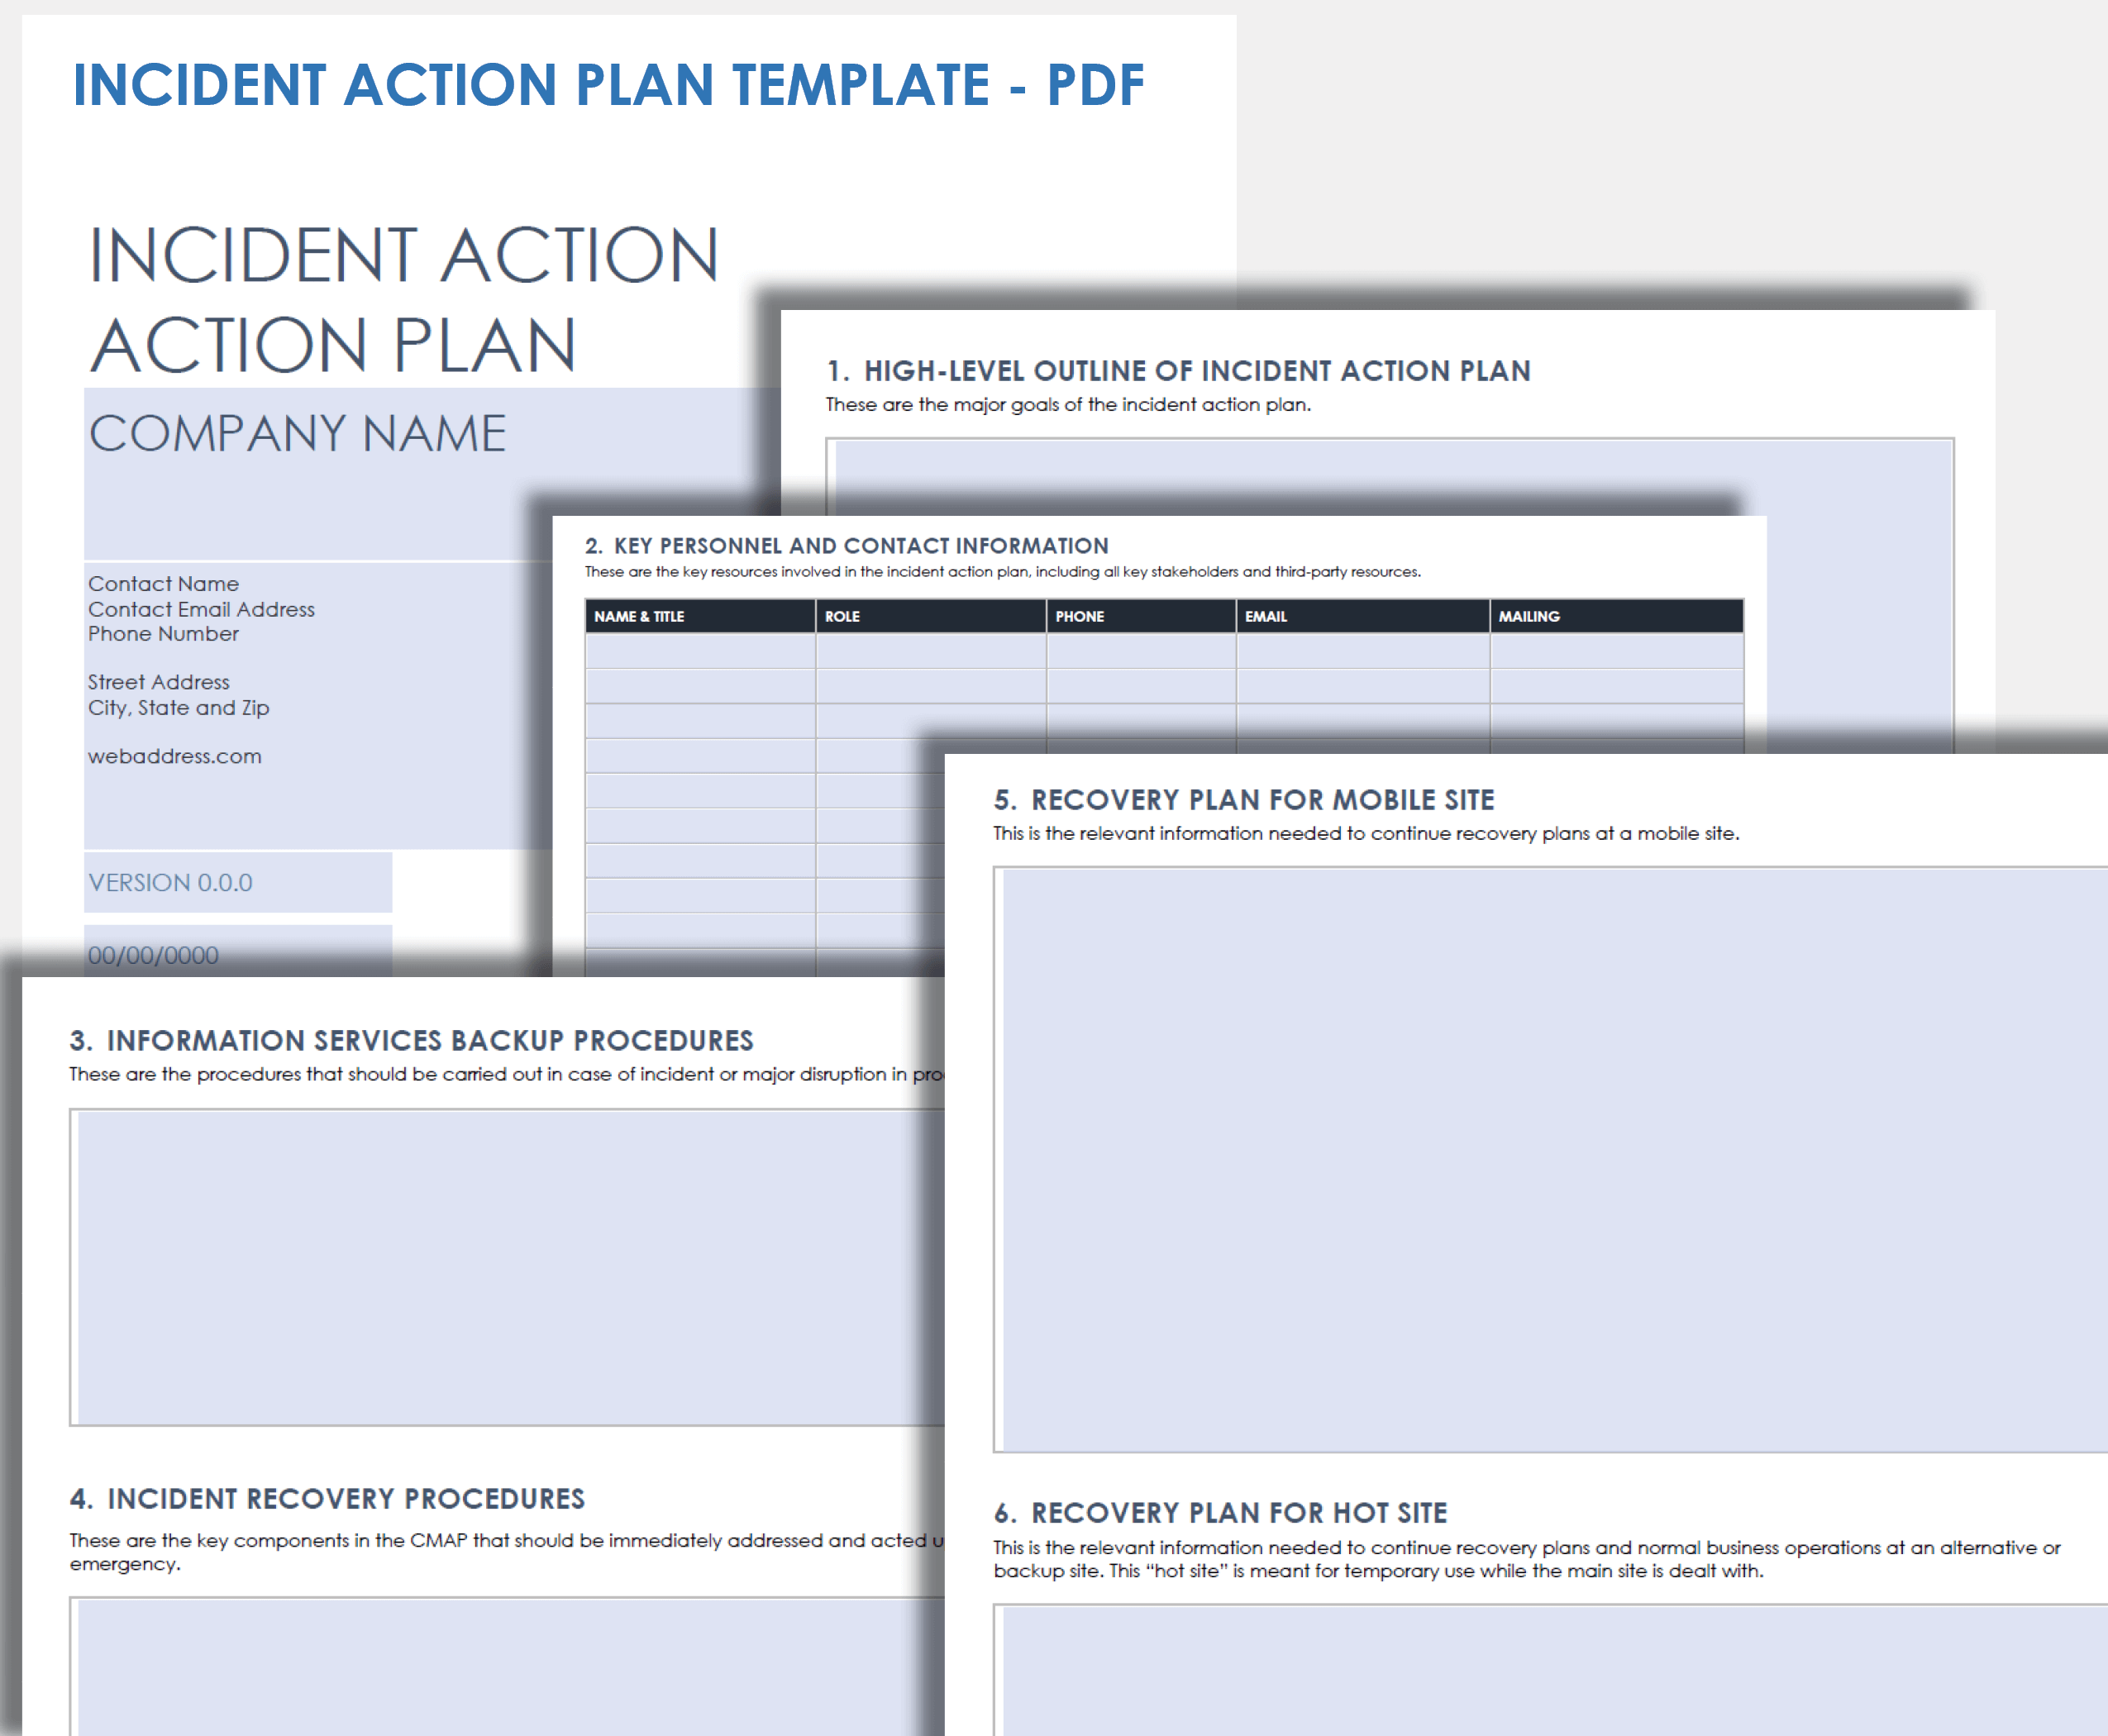 Incident Action Plan Template PDF